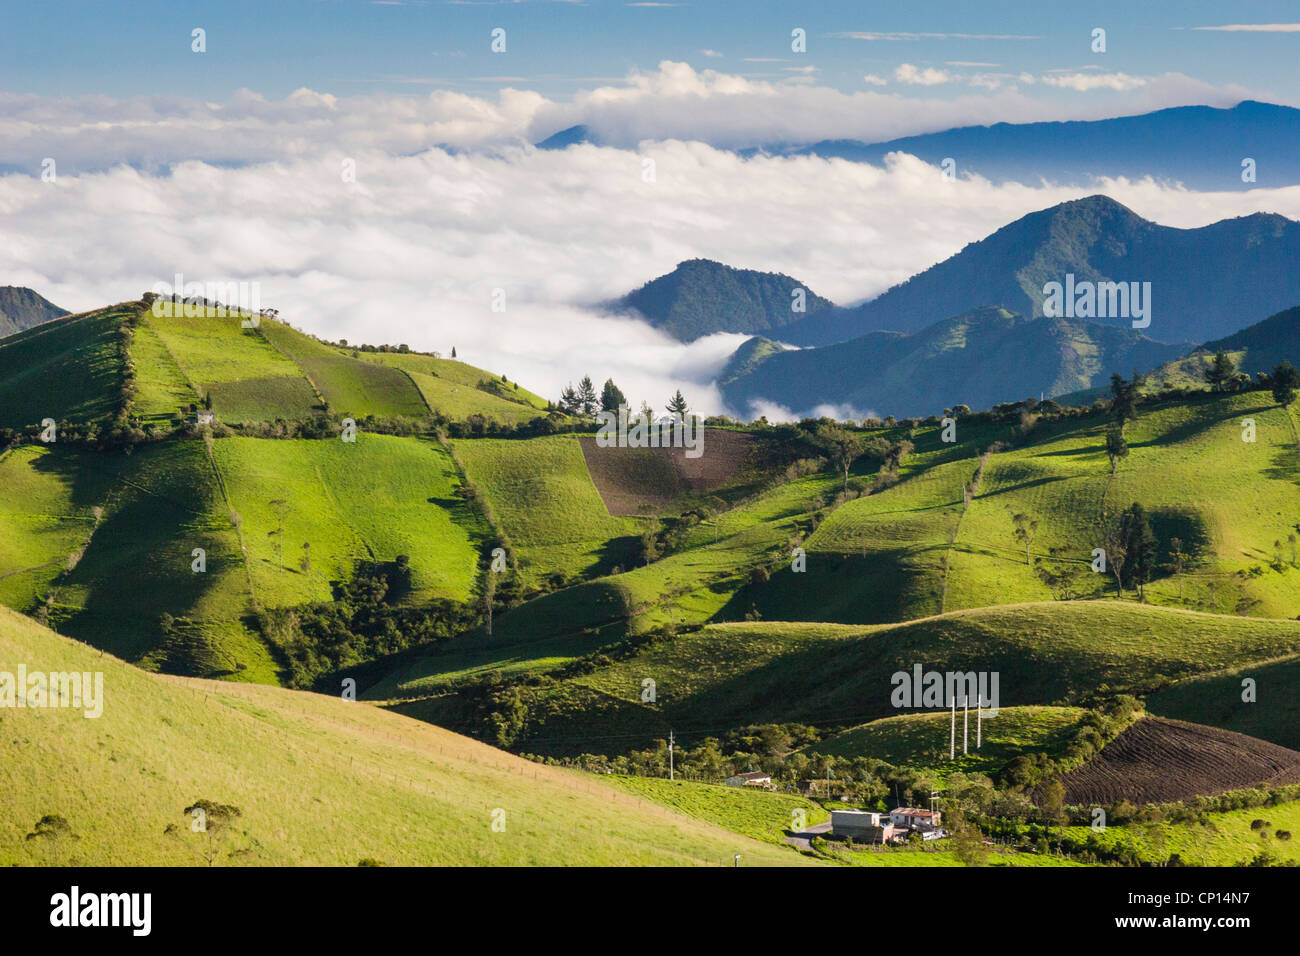 View from Nono-Mindo Road through mountain landscapes and farms in Western Andes in Ecuador at altitudes above 11,000 feet. Stock Photo